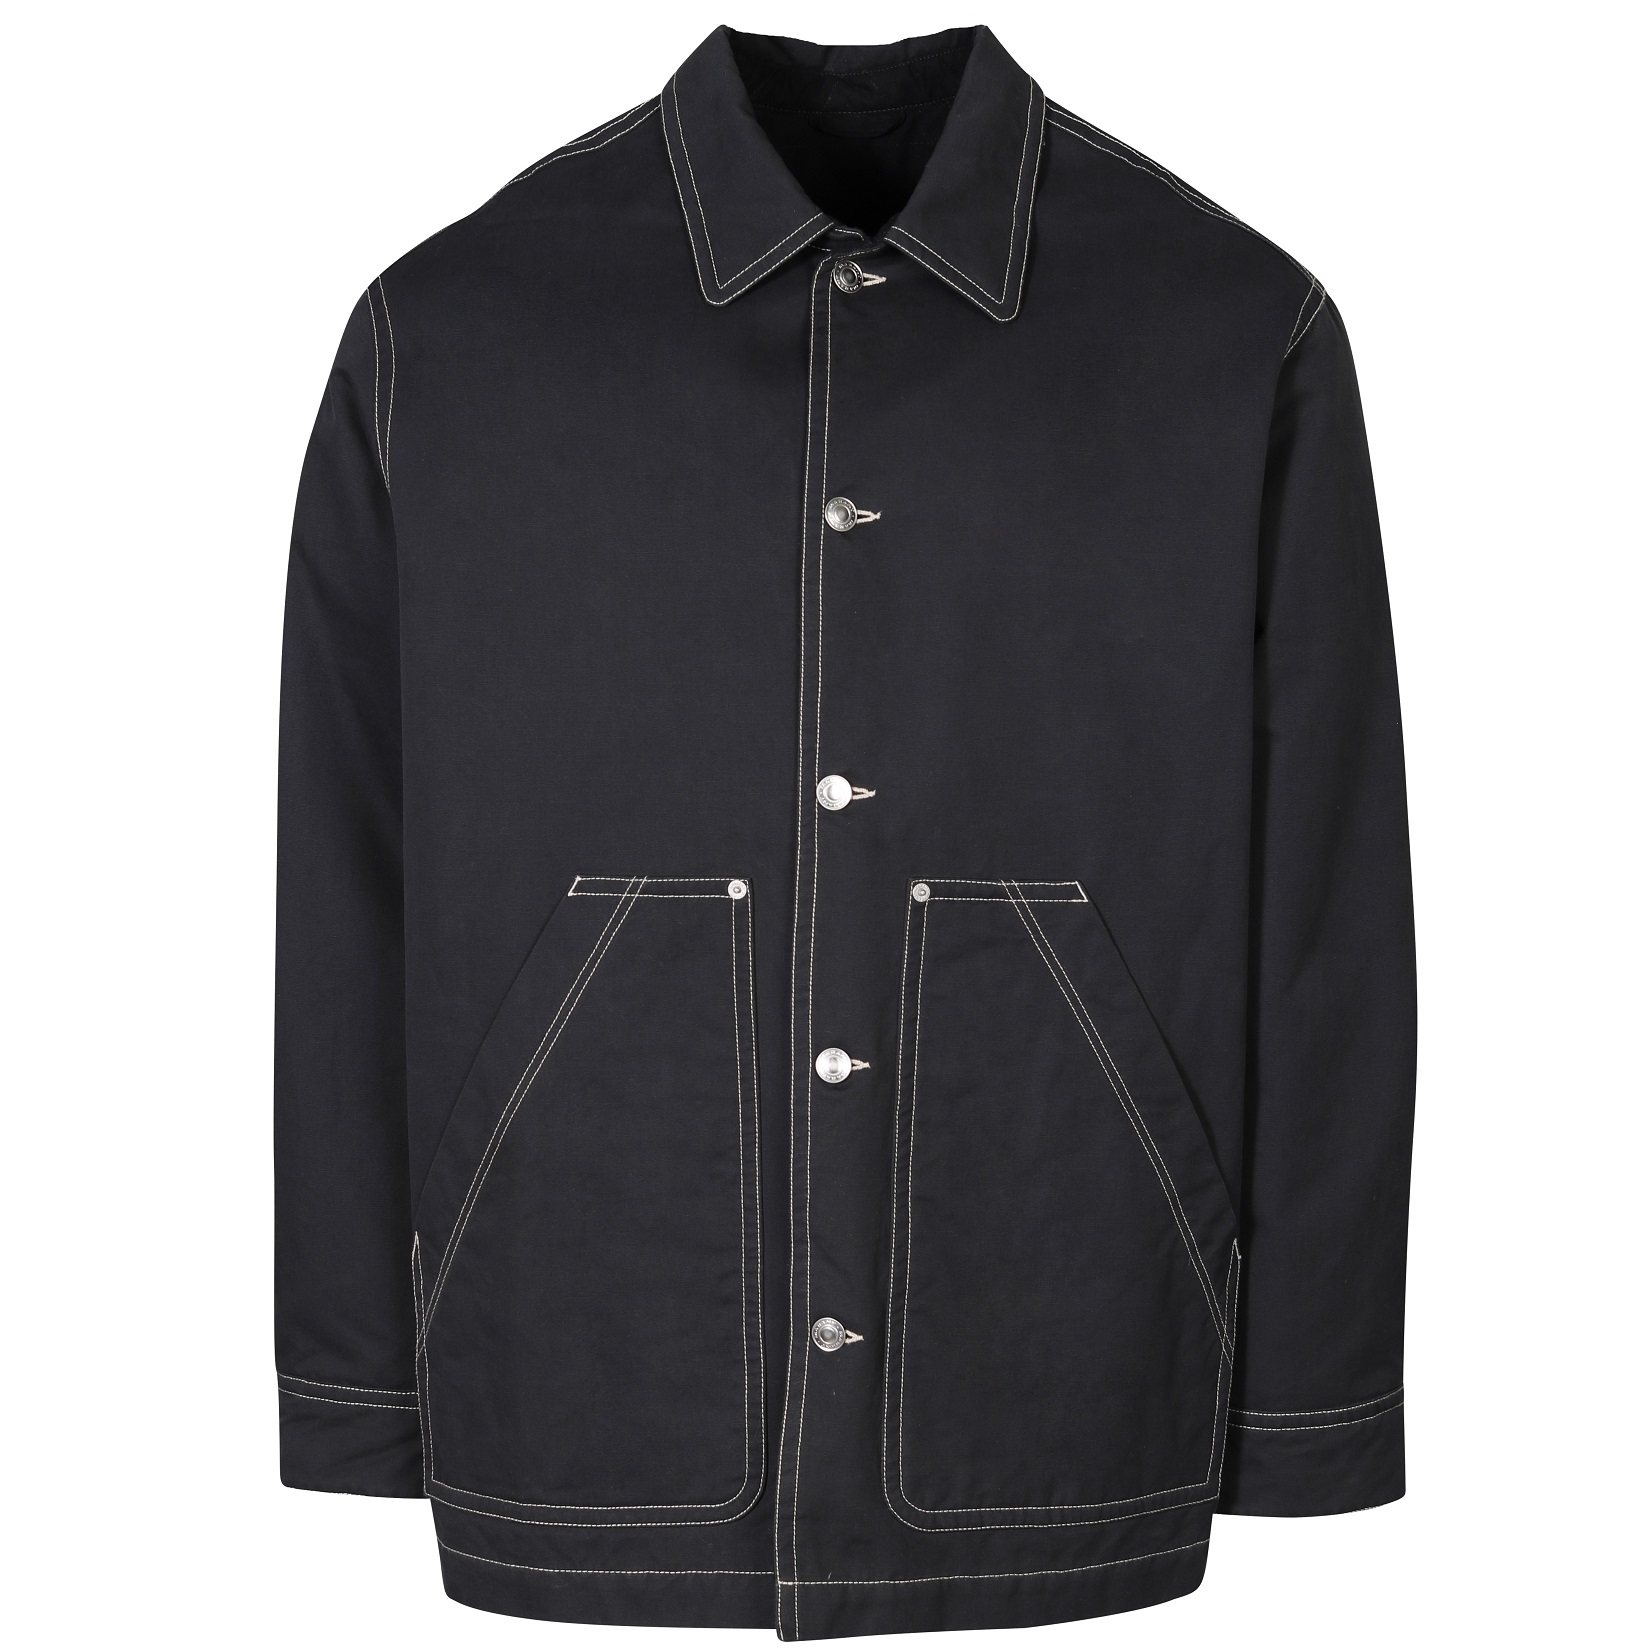 ISABEL MARANT Lawrence Jacket in Faded Black S